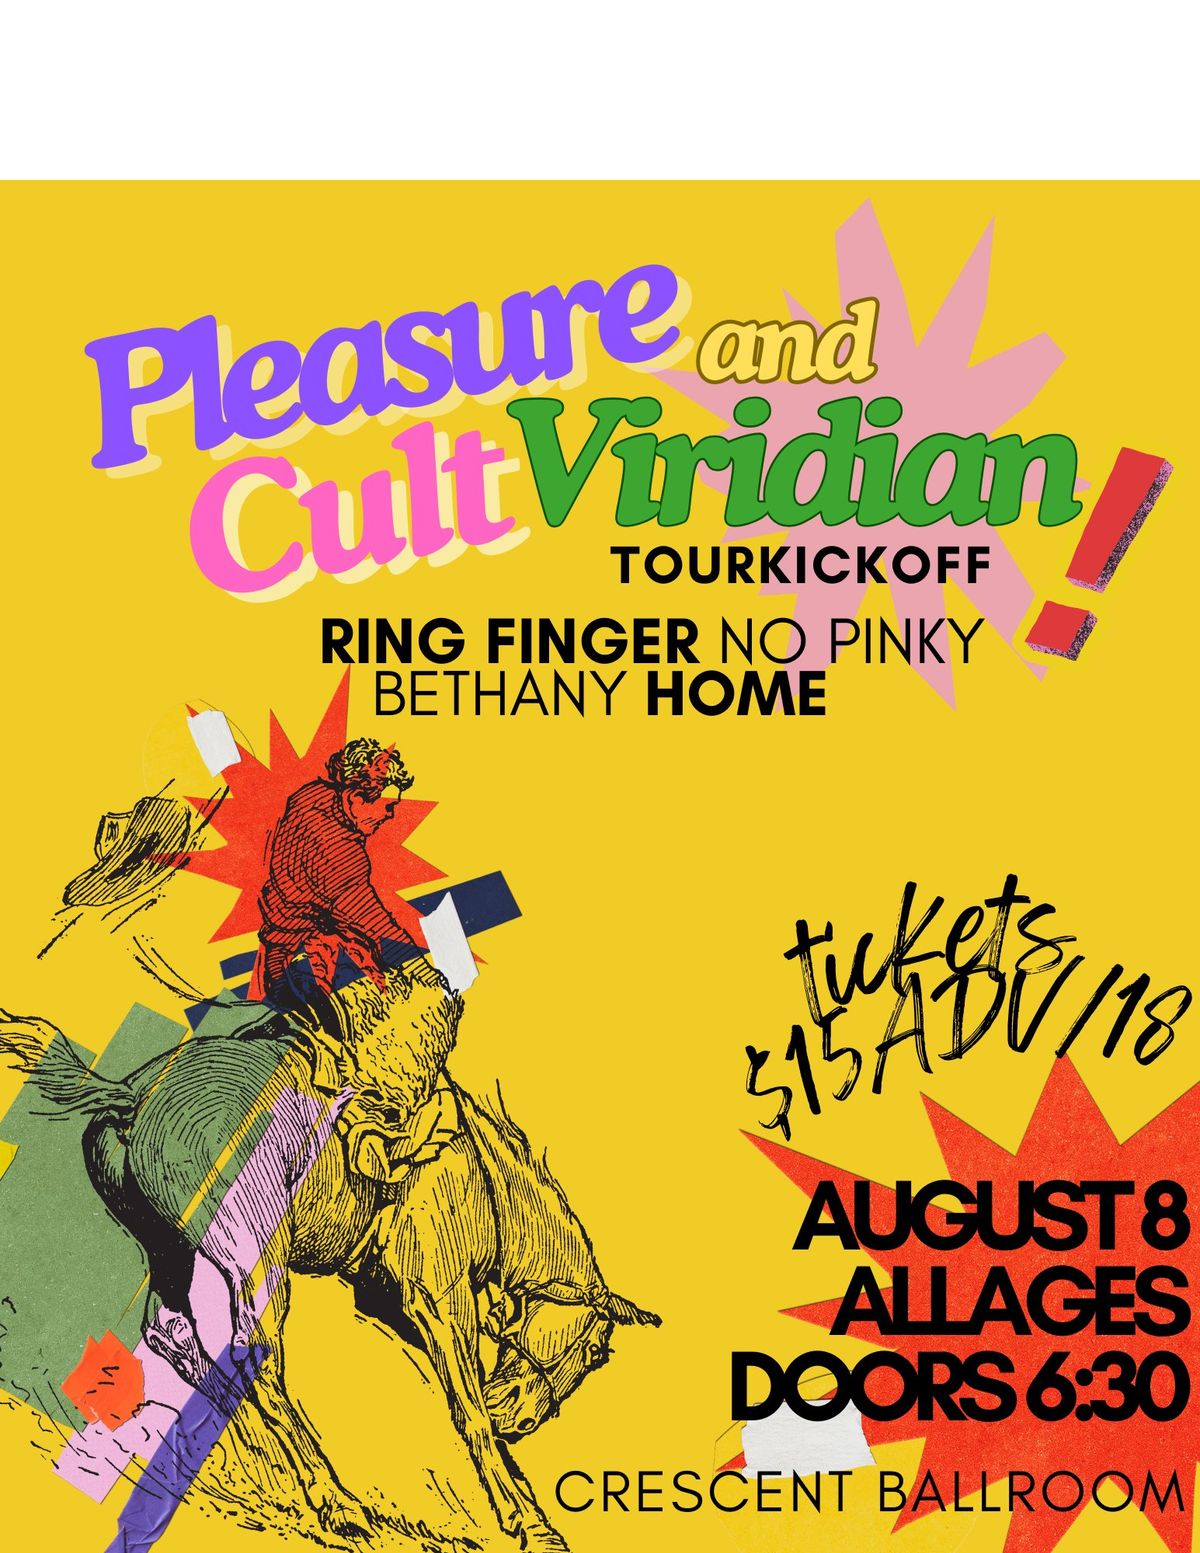 PLEASURE CULT + VIRIDIAN TOUR KICKOFF WITH BETHANY HOME + RING FINGER NO PINKY